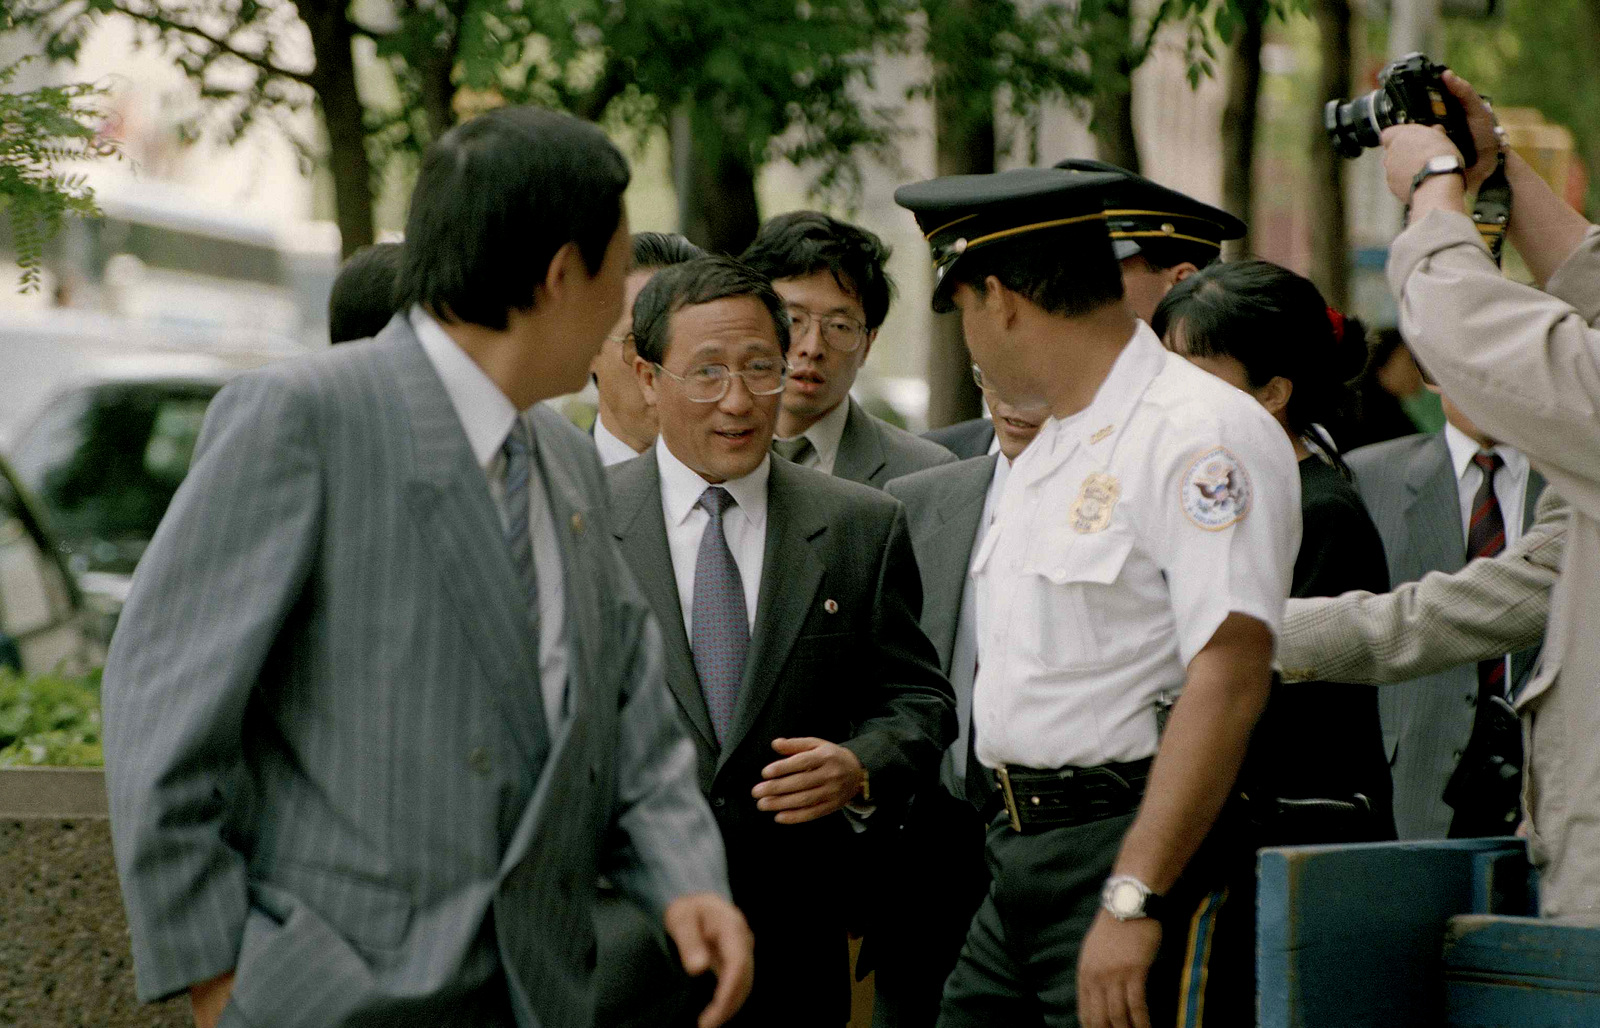 North Korea's foreign Minister Kang Sok Ju arrives at the U.S. Mission to the UN in New York, June 2, 1993, to discuss opening North Korea to IAEA inspectors. Ed Bailey | AP